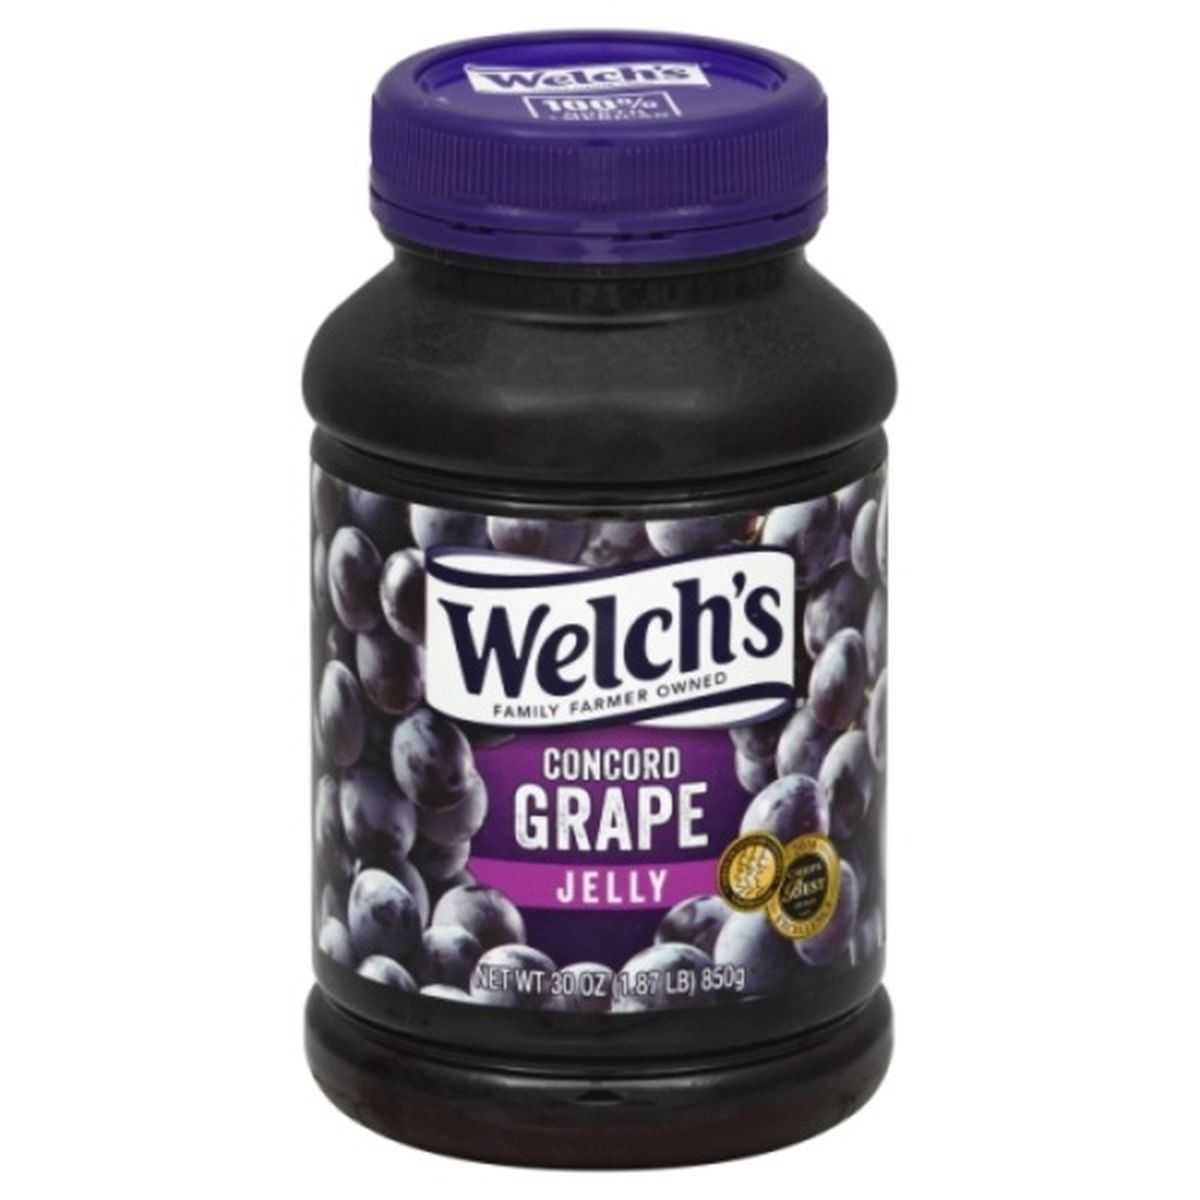 Calories in Welch's Jelly, Concord Grape